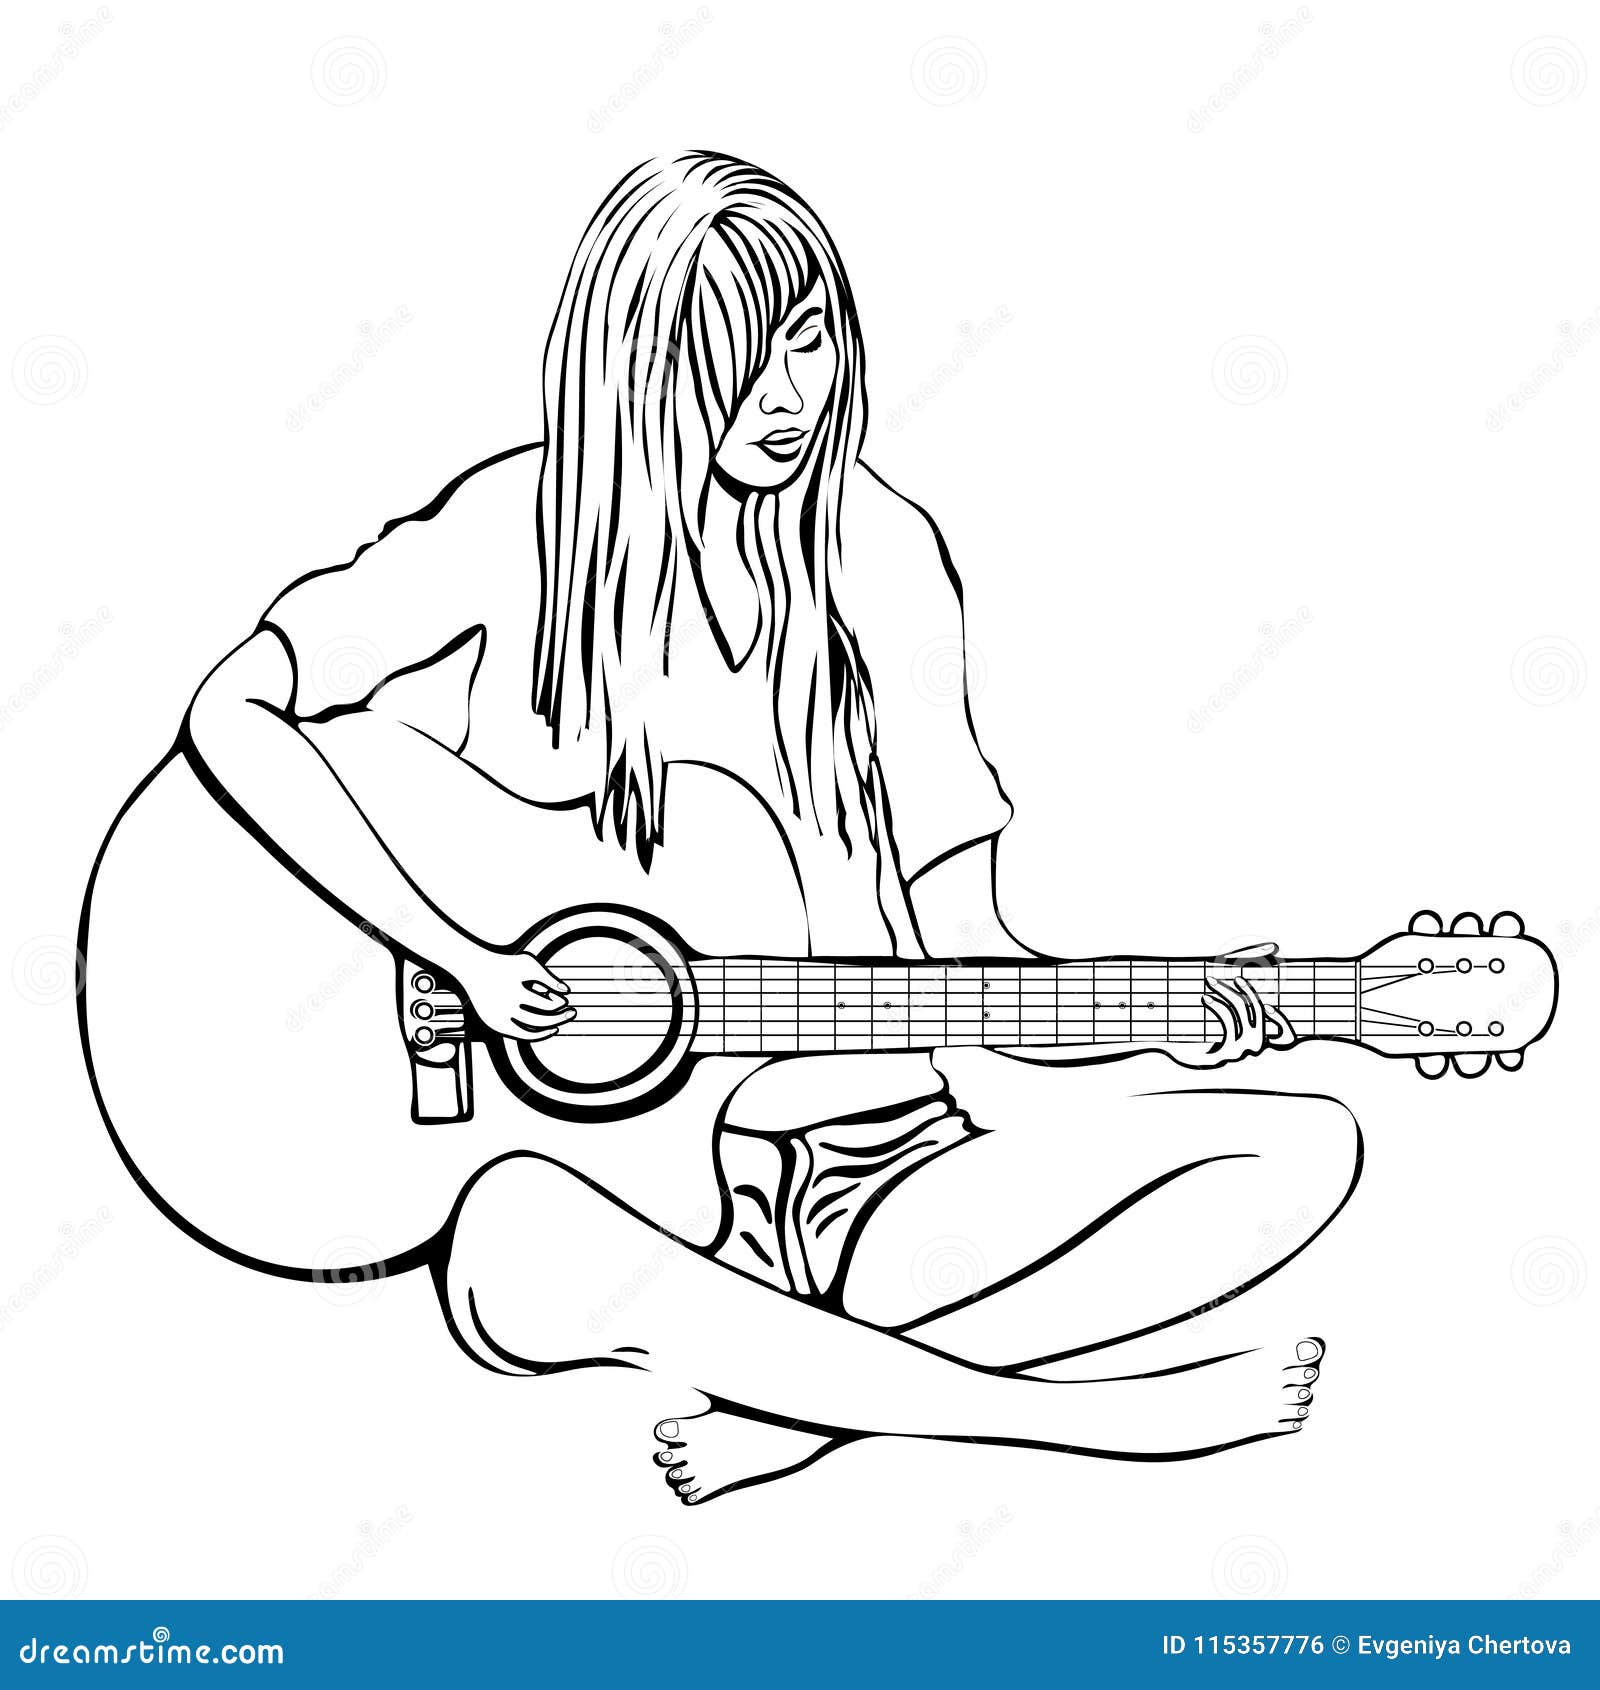 How to draw a Girl Playing Guitar || Pencil sketch for beginner || Guitar  with girl || girl drawing - YouTube